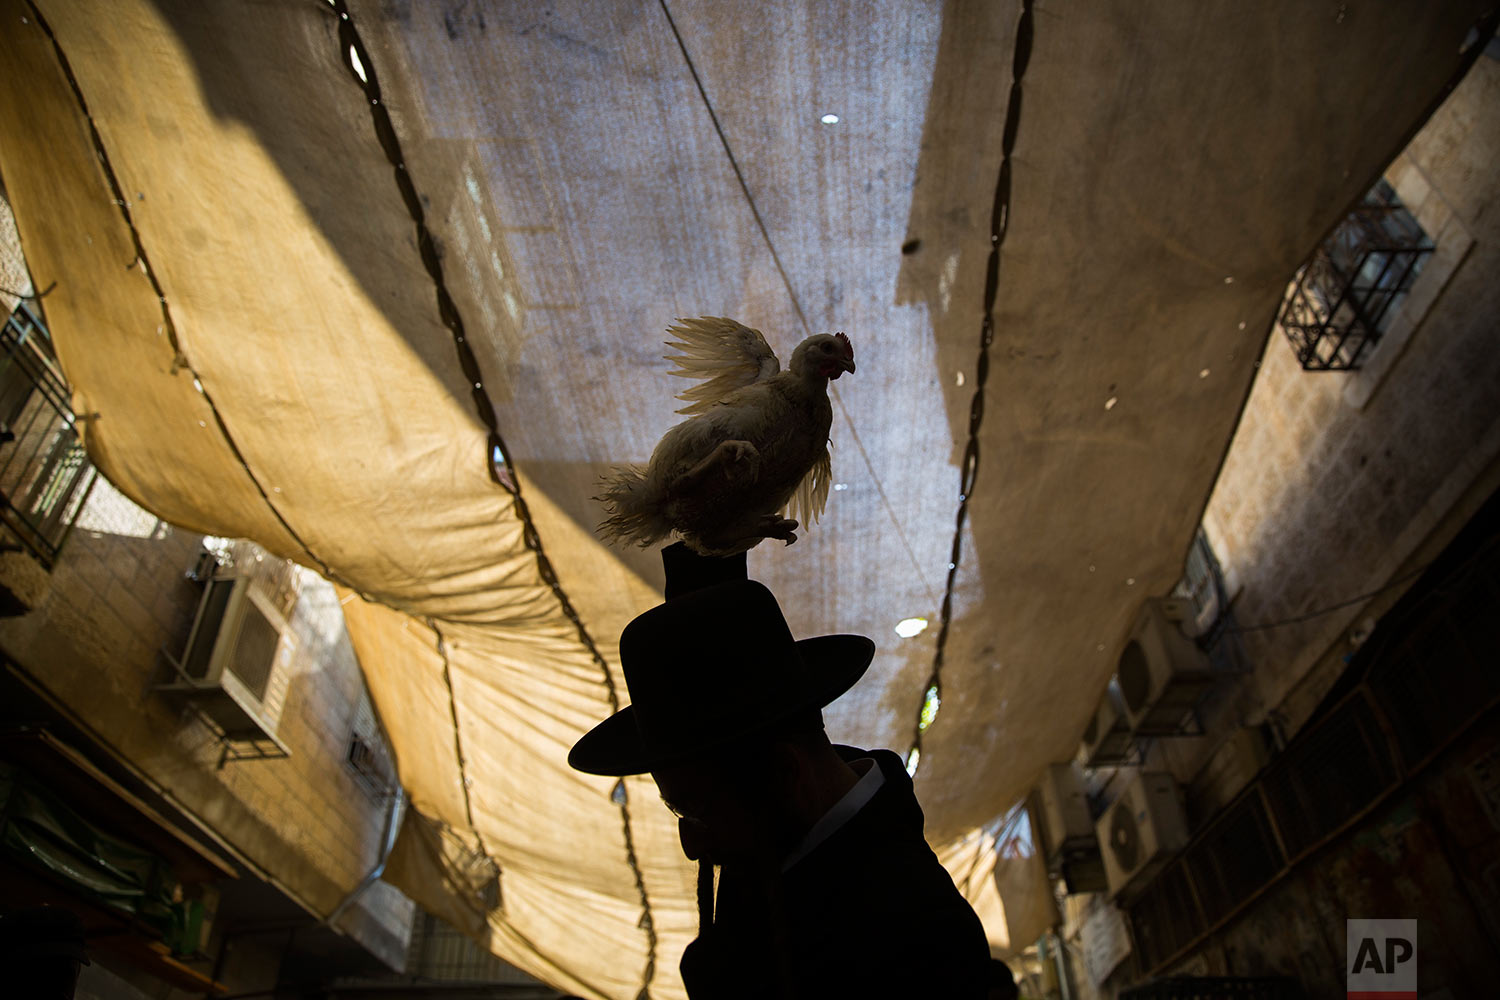  An ultra-Orthodox Jewish man swings a chicken over his head as part of the Kaparot ritual in Jerusalem, Wednesday, Sept. 27, 2017. (AP Photo/Oded Balilty) 